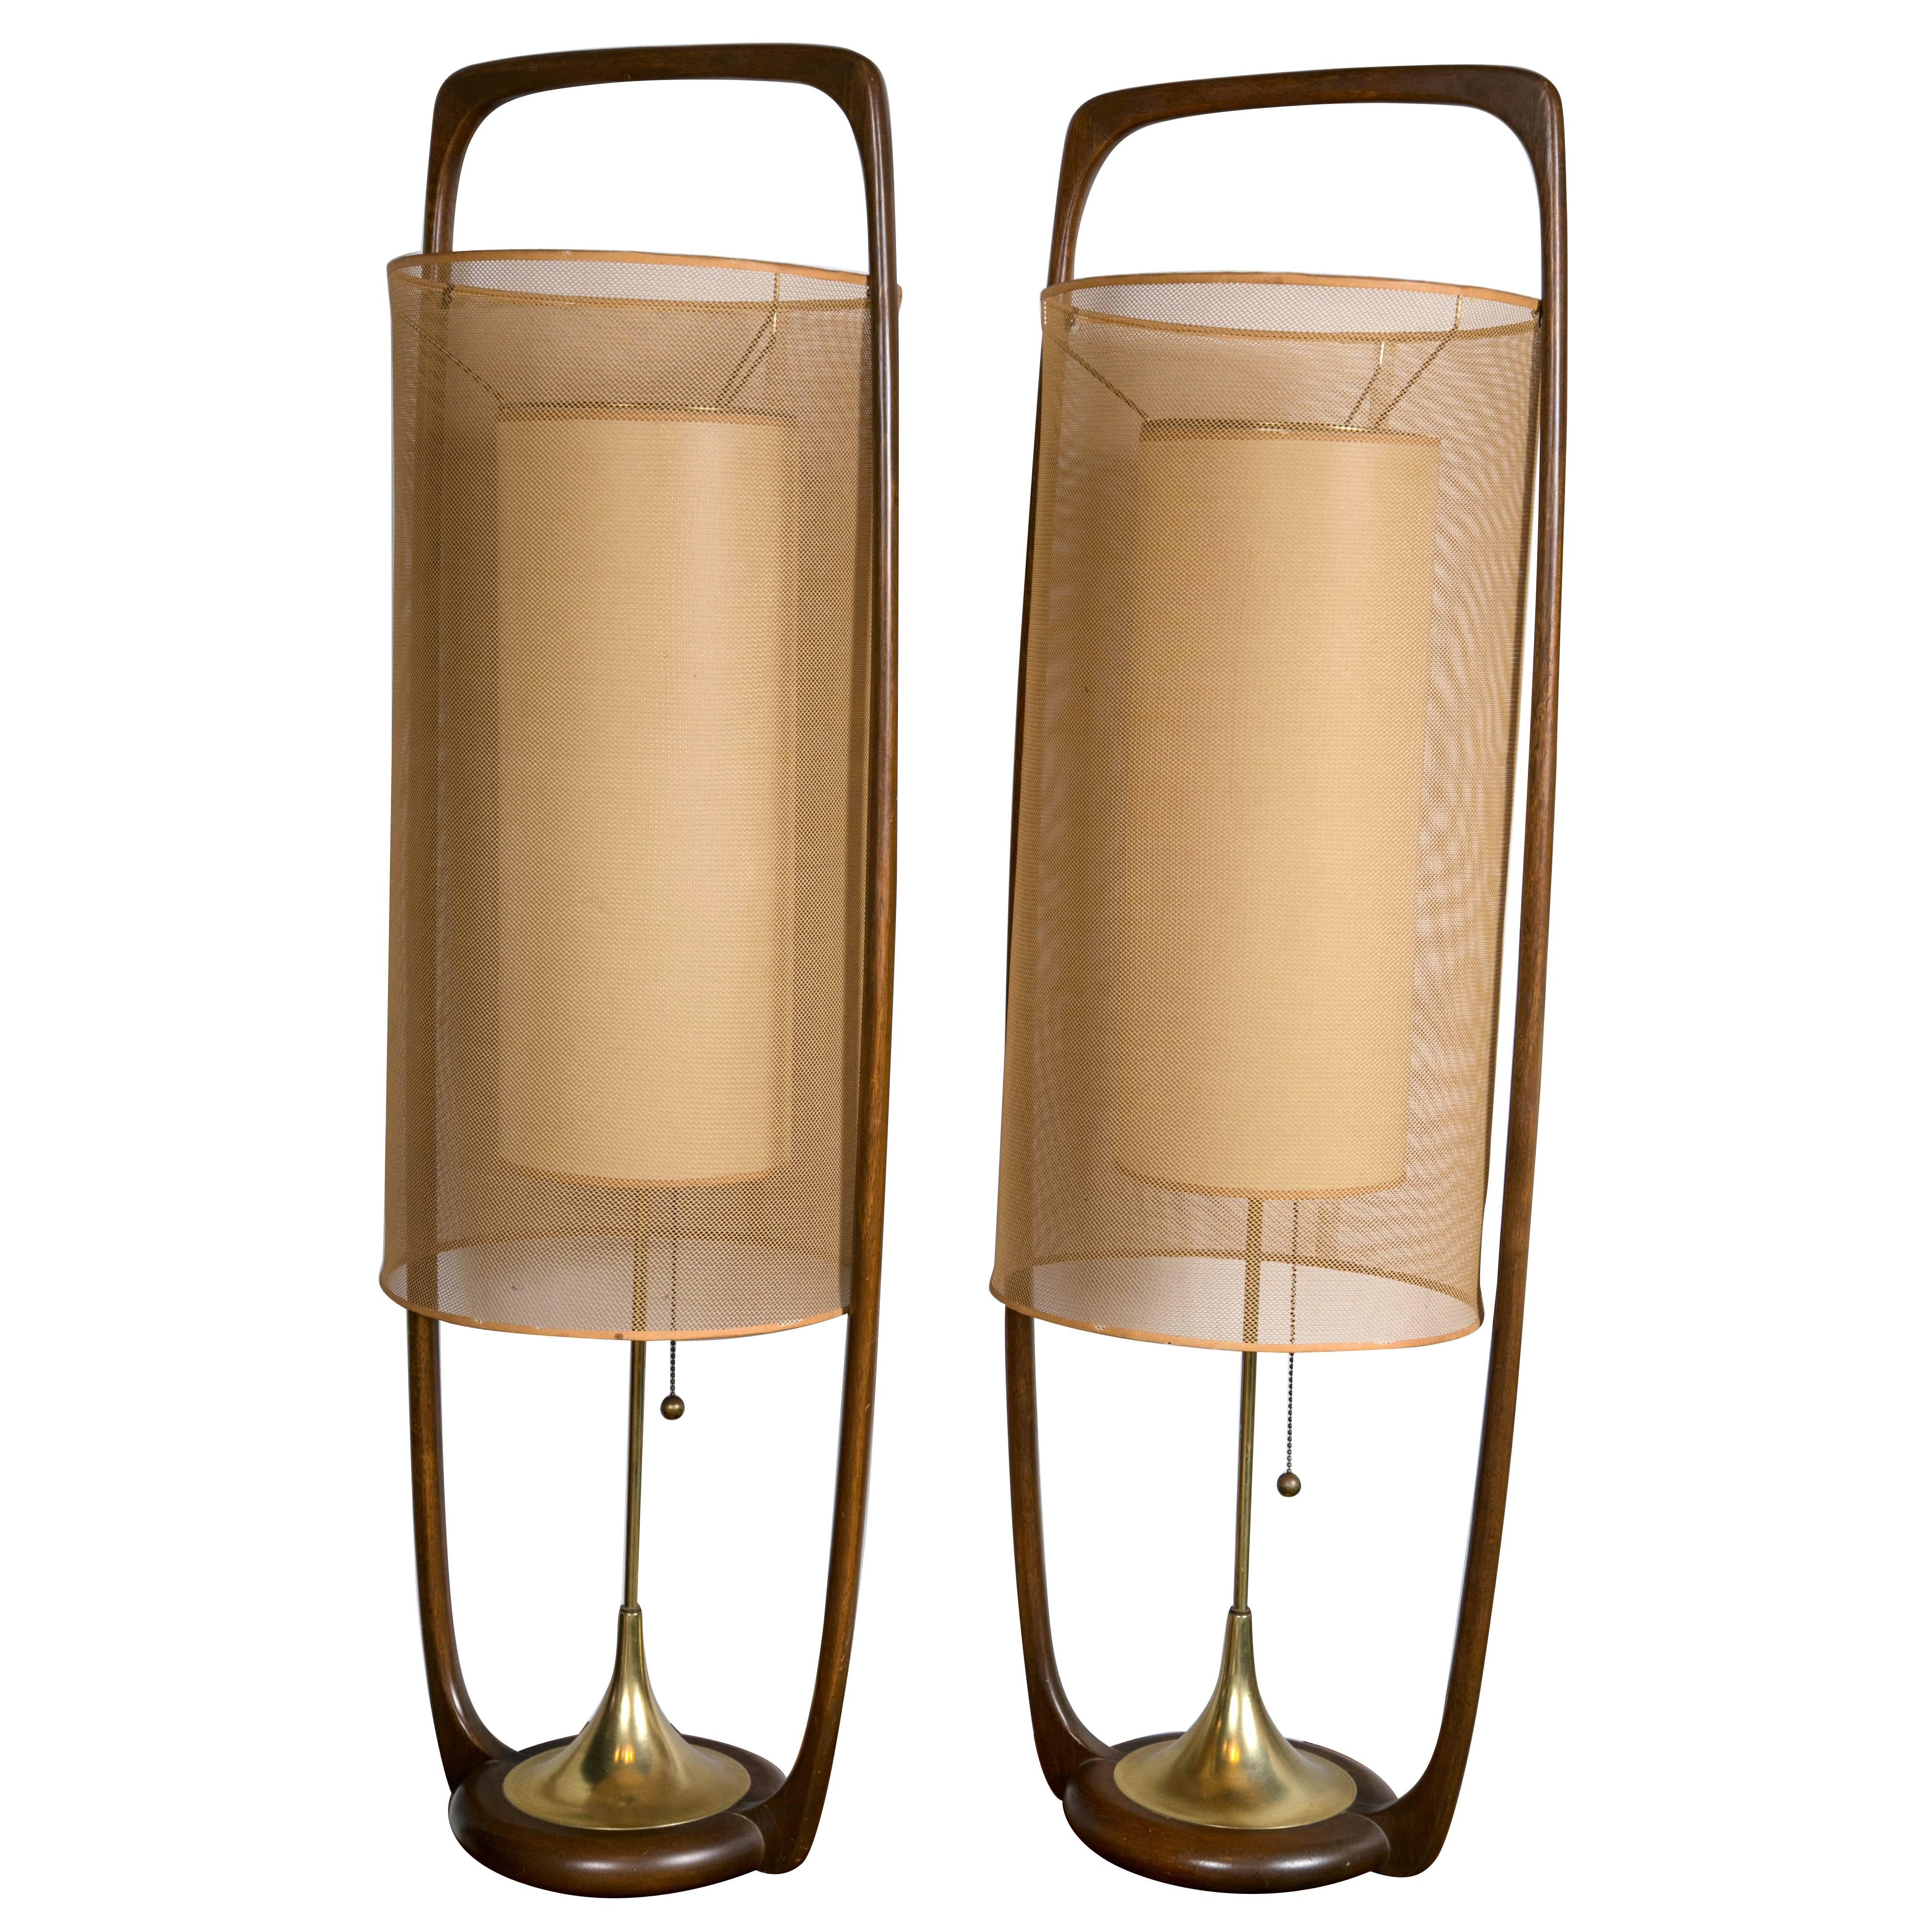 Pair of Mid-Century Modern Lamps by Modeline